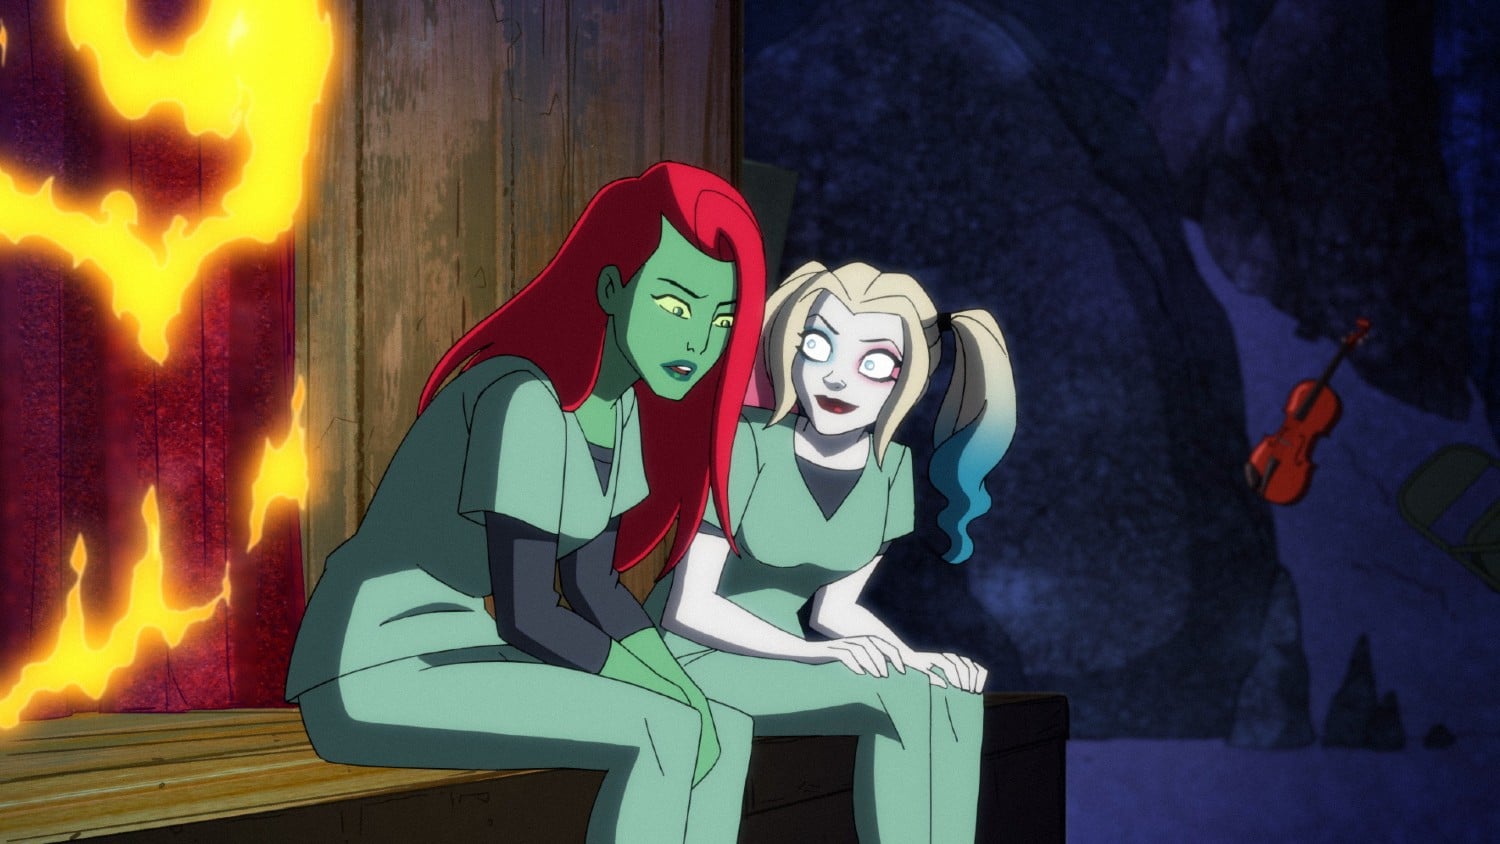 Harley Quinn Season 2 Episode 7 Review: There’s No Place To Go But Down